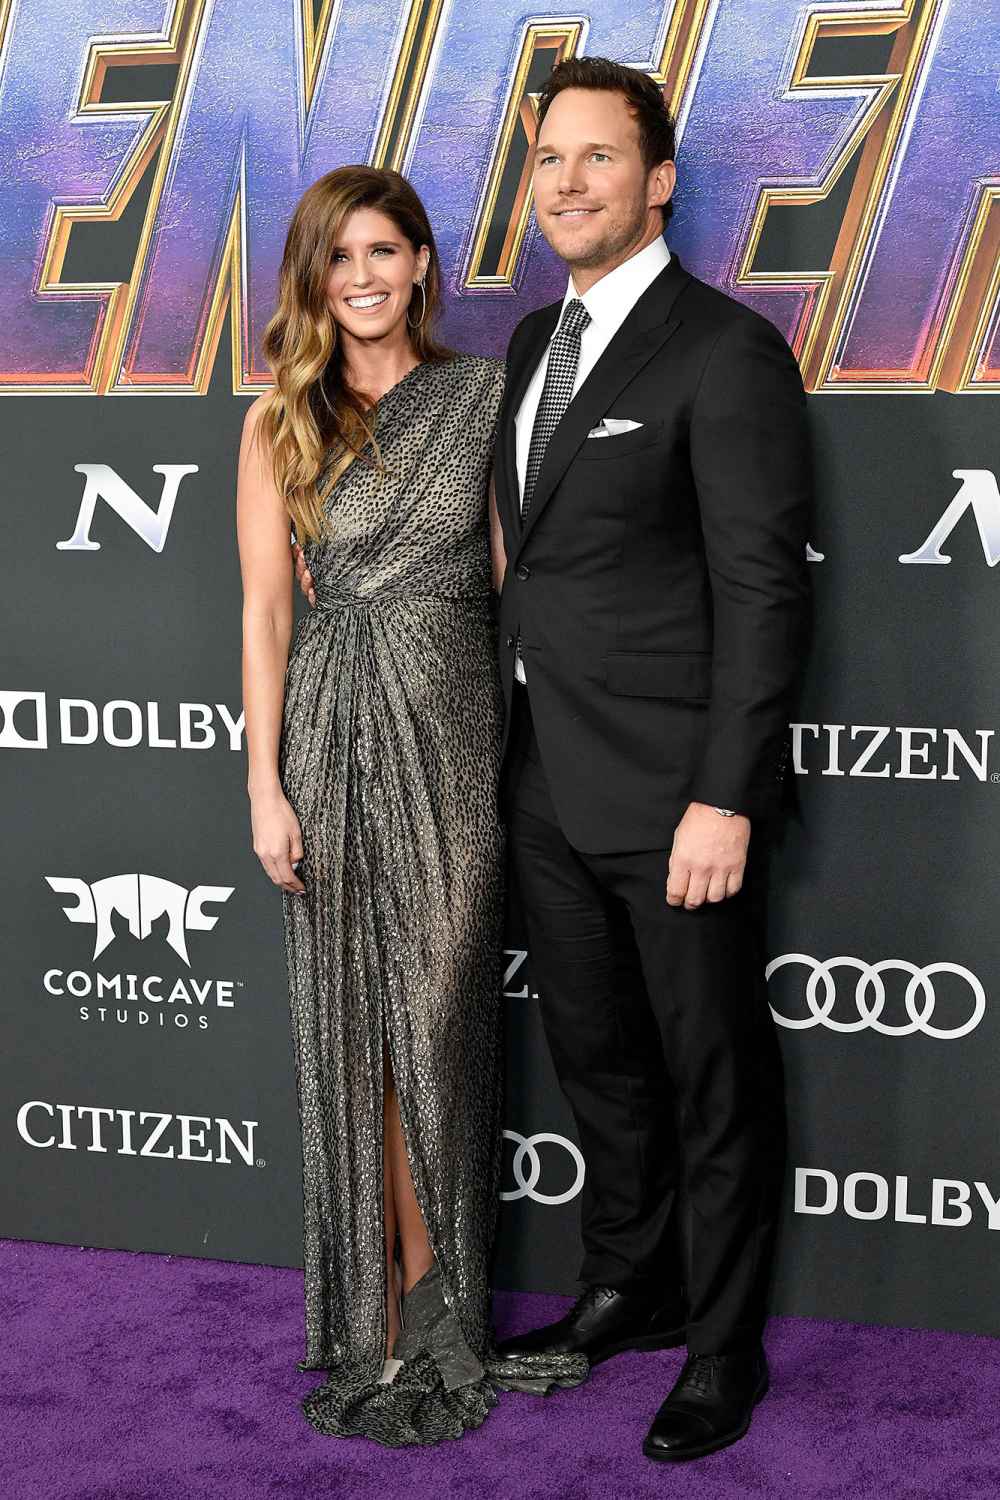 Katherine Schwarzenegger Is Pregnant With Her and Chris Pratt 2nd Child Together